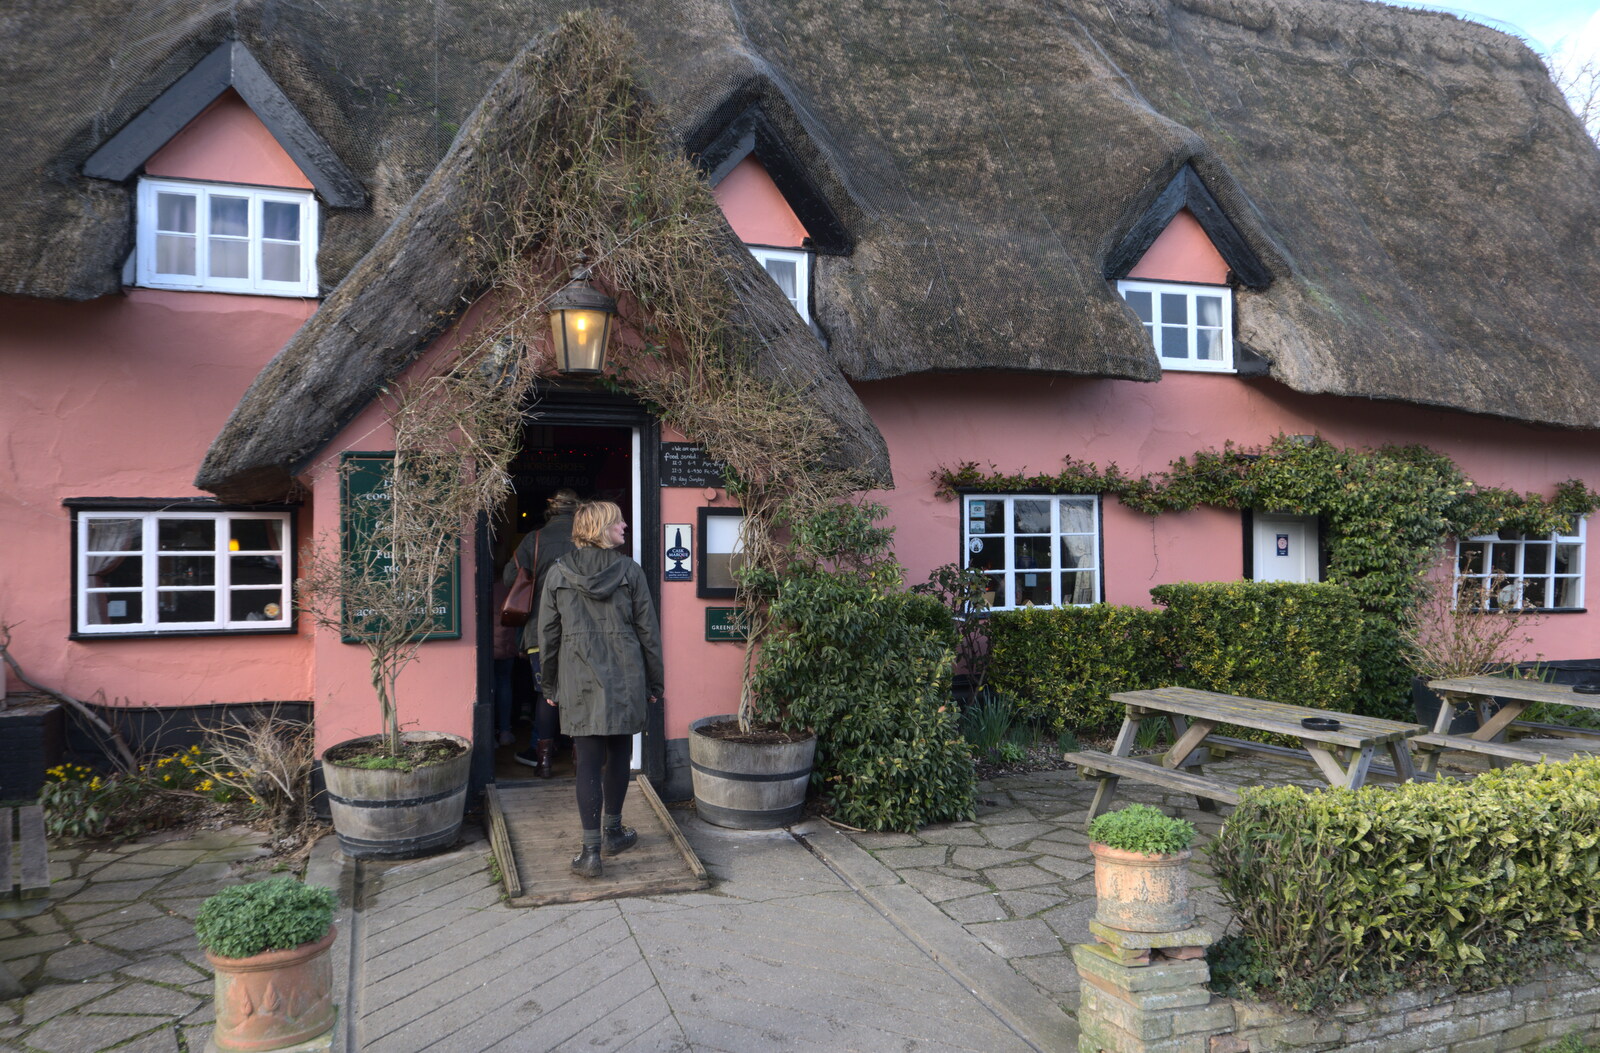 The shaggy thatch of the Four Horseshoes from Sunday Lunch and a SwiftKey Trip to Nando's, Thornham and Bayswater - 22nd February 2020